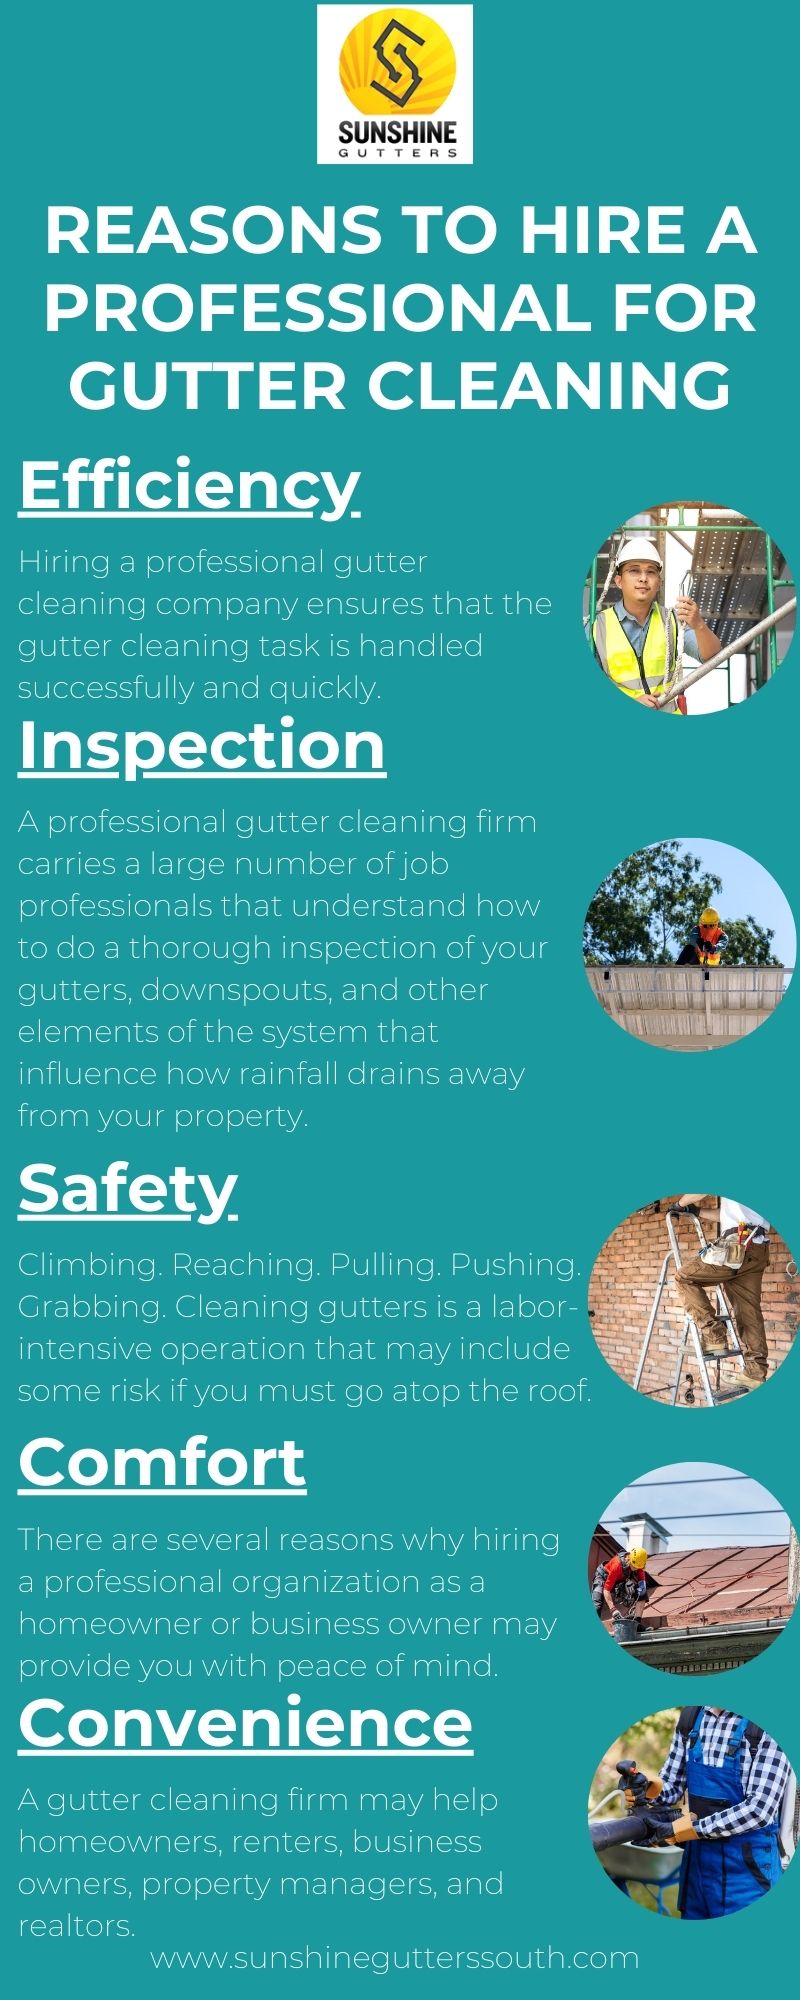 REASONS TO HIRE A PROFESSIONAL FOR GUTTER CLEANING